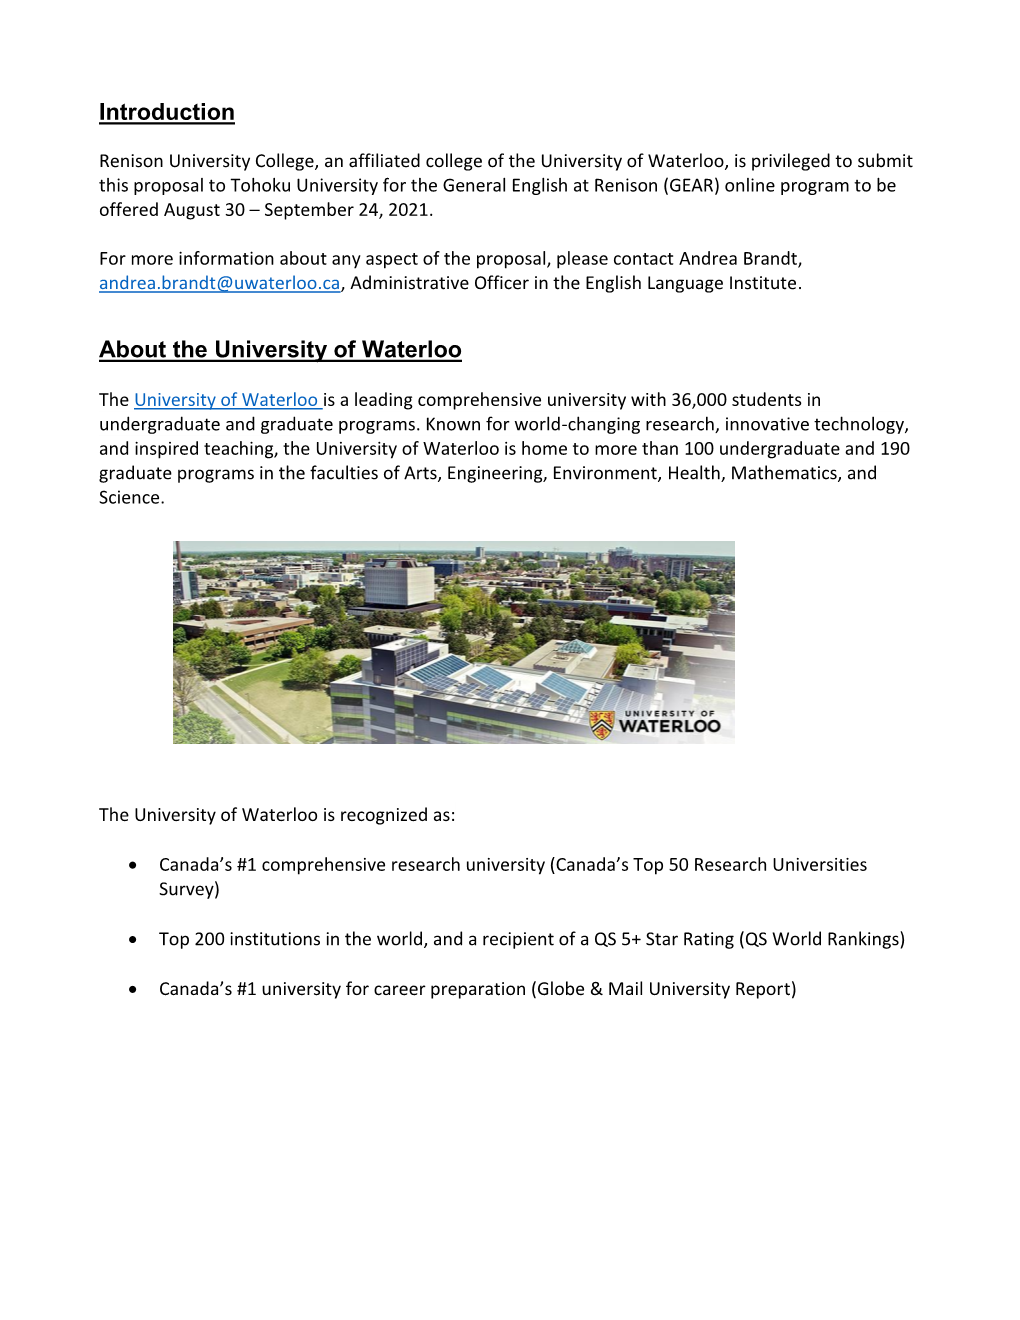 Introduction About the University of Waterloo